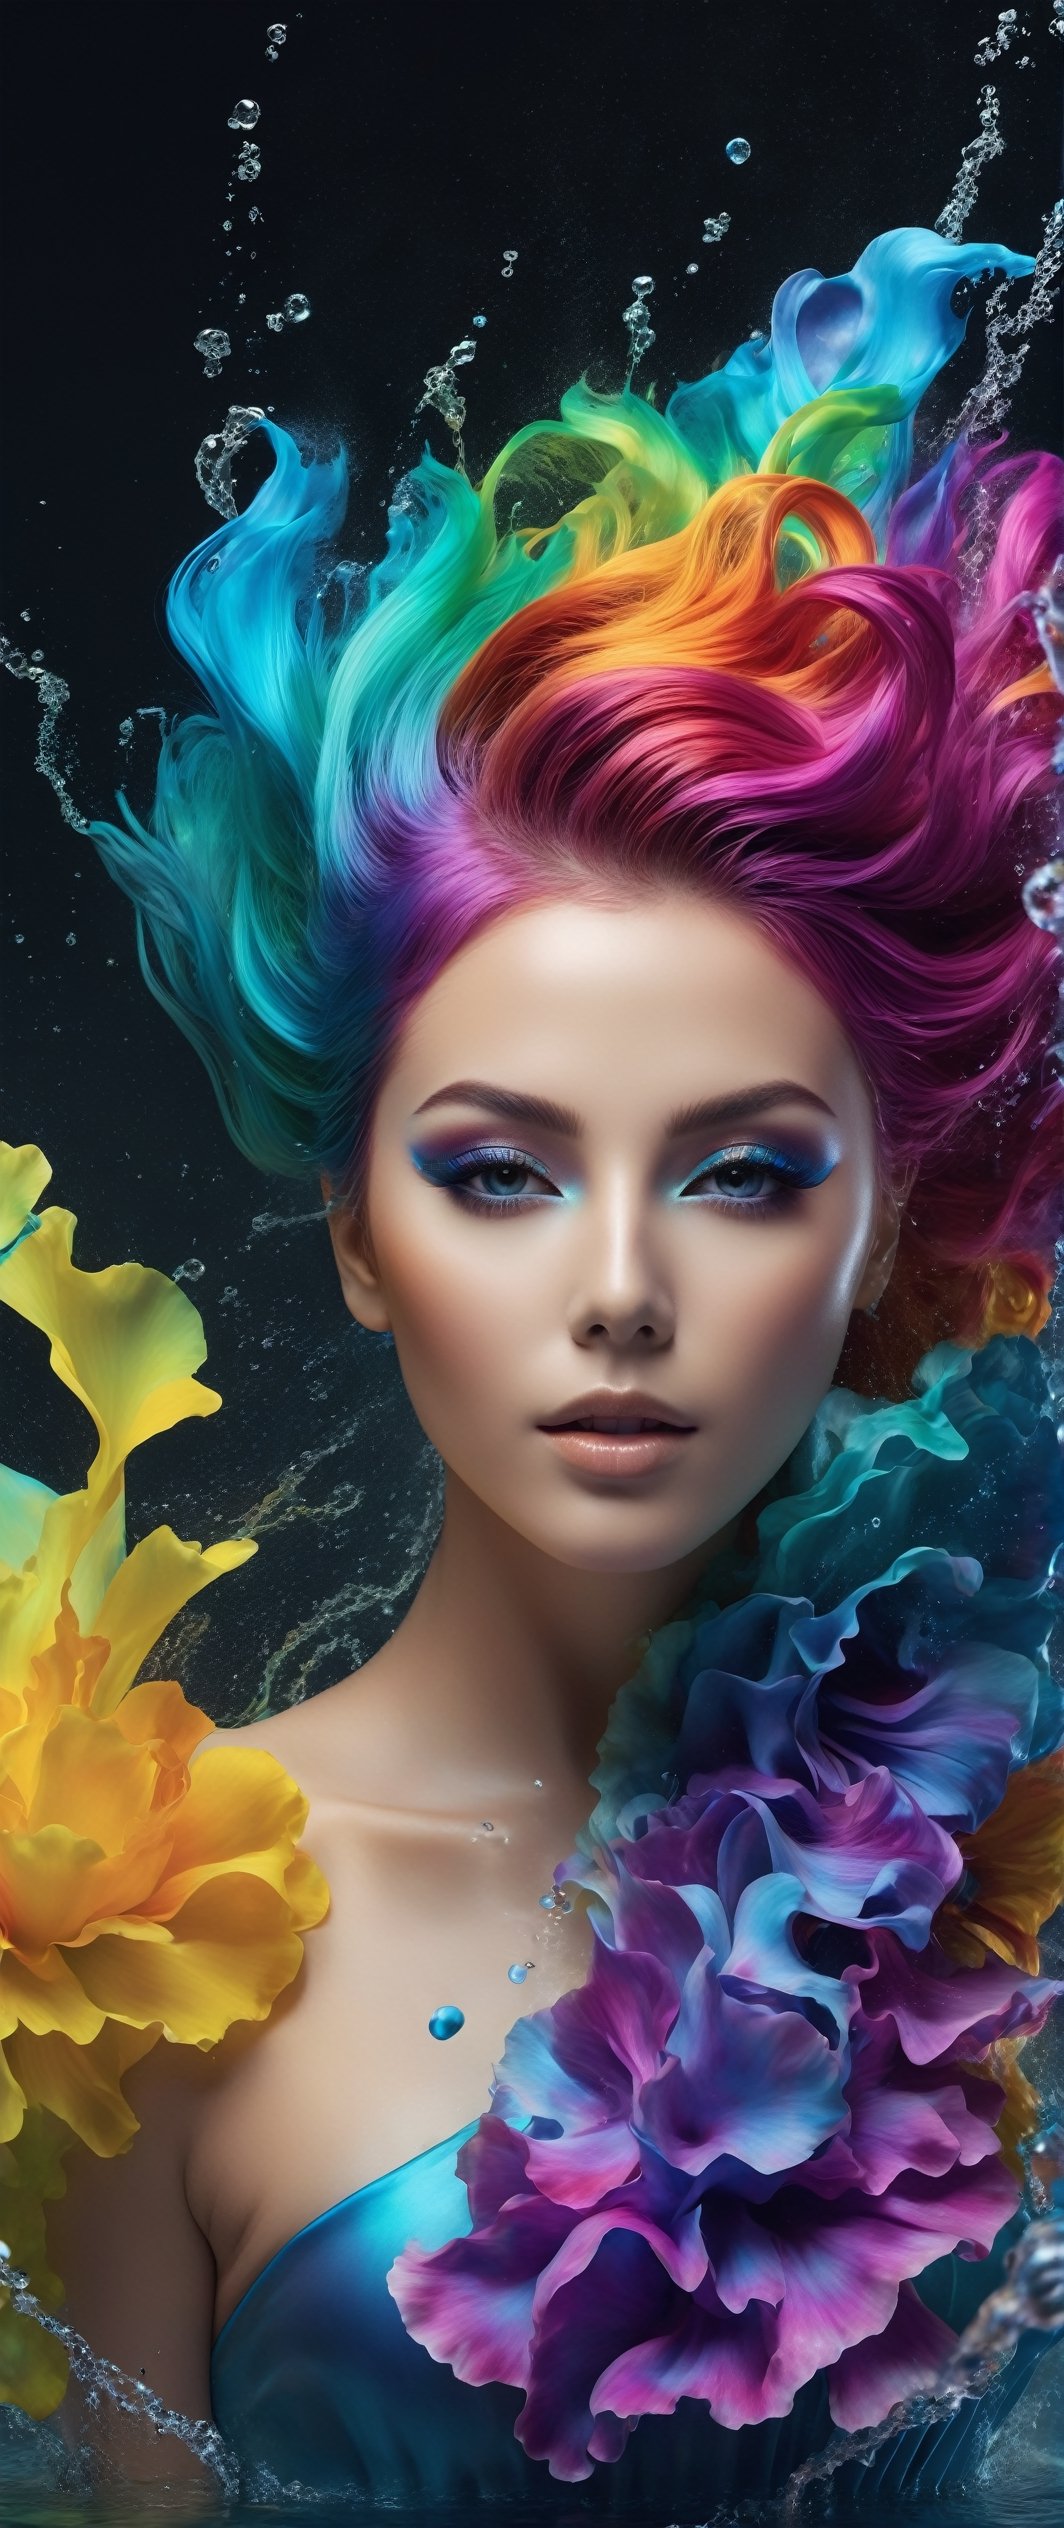 Beatiful steam-like woman with colorful flowy hair and body resembling steam in water, work of beauty and complexity,  ghostcore, prismatic glow elements, fluidity, detailed face, 8k UHD ,A girl dancing,  alberto seveso style, flower petals flying with the wind,photo r3al,Leonardo Style,niji style